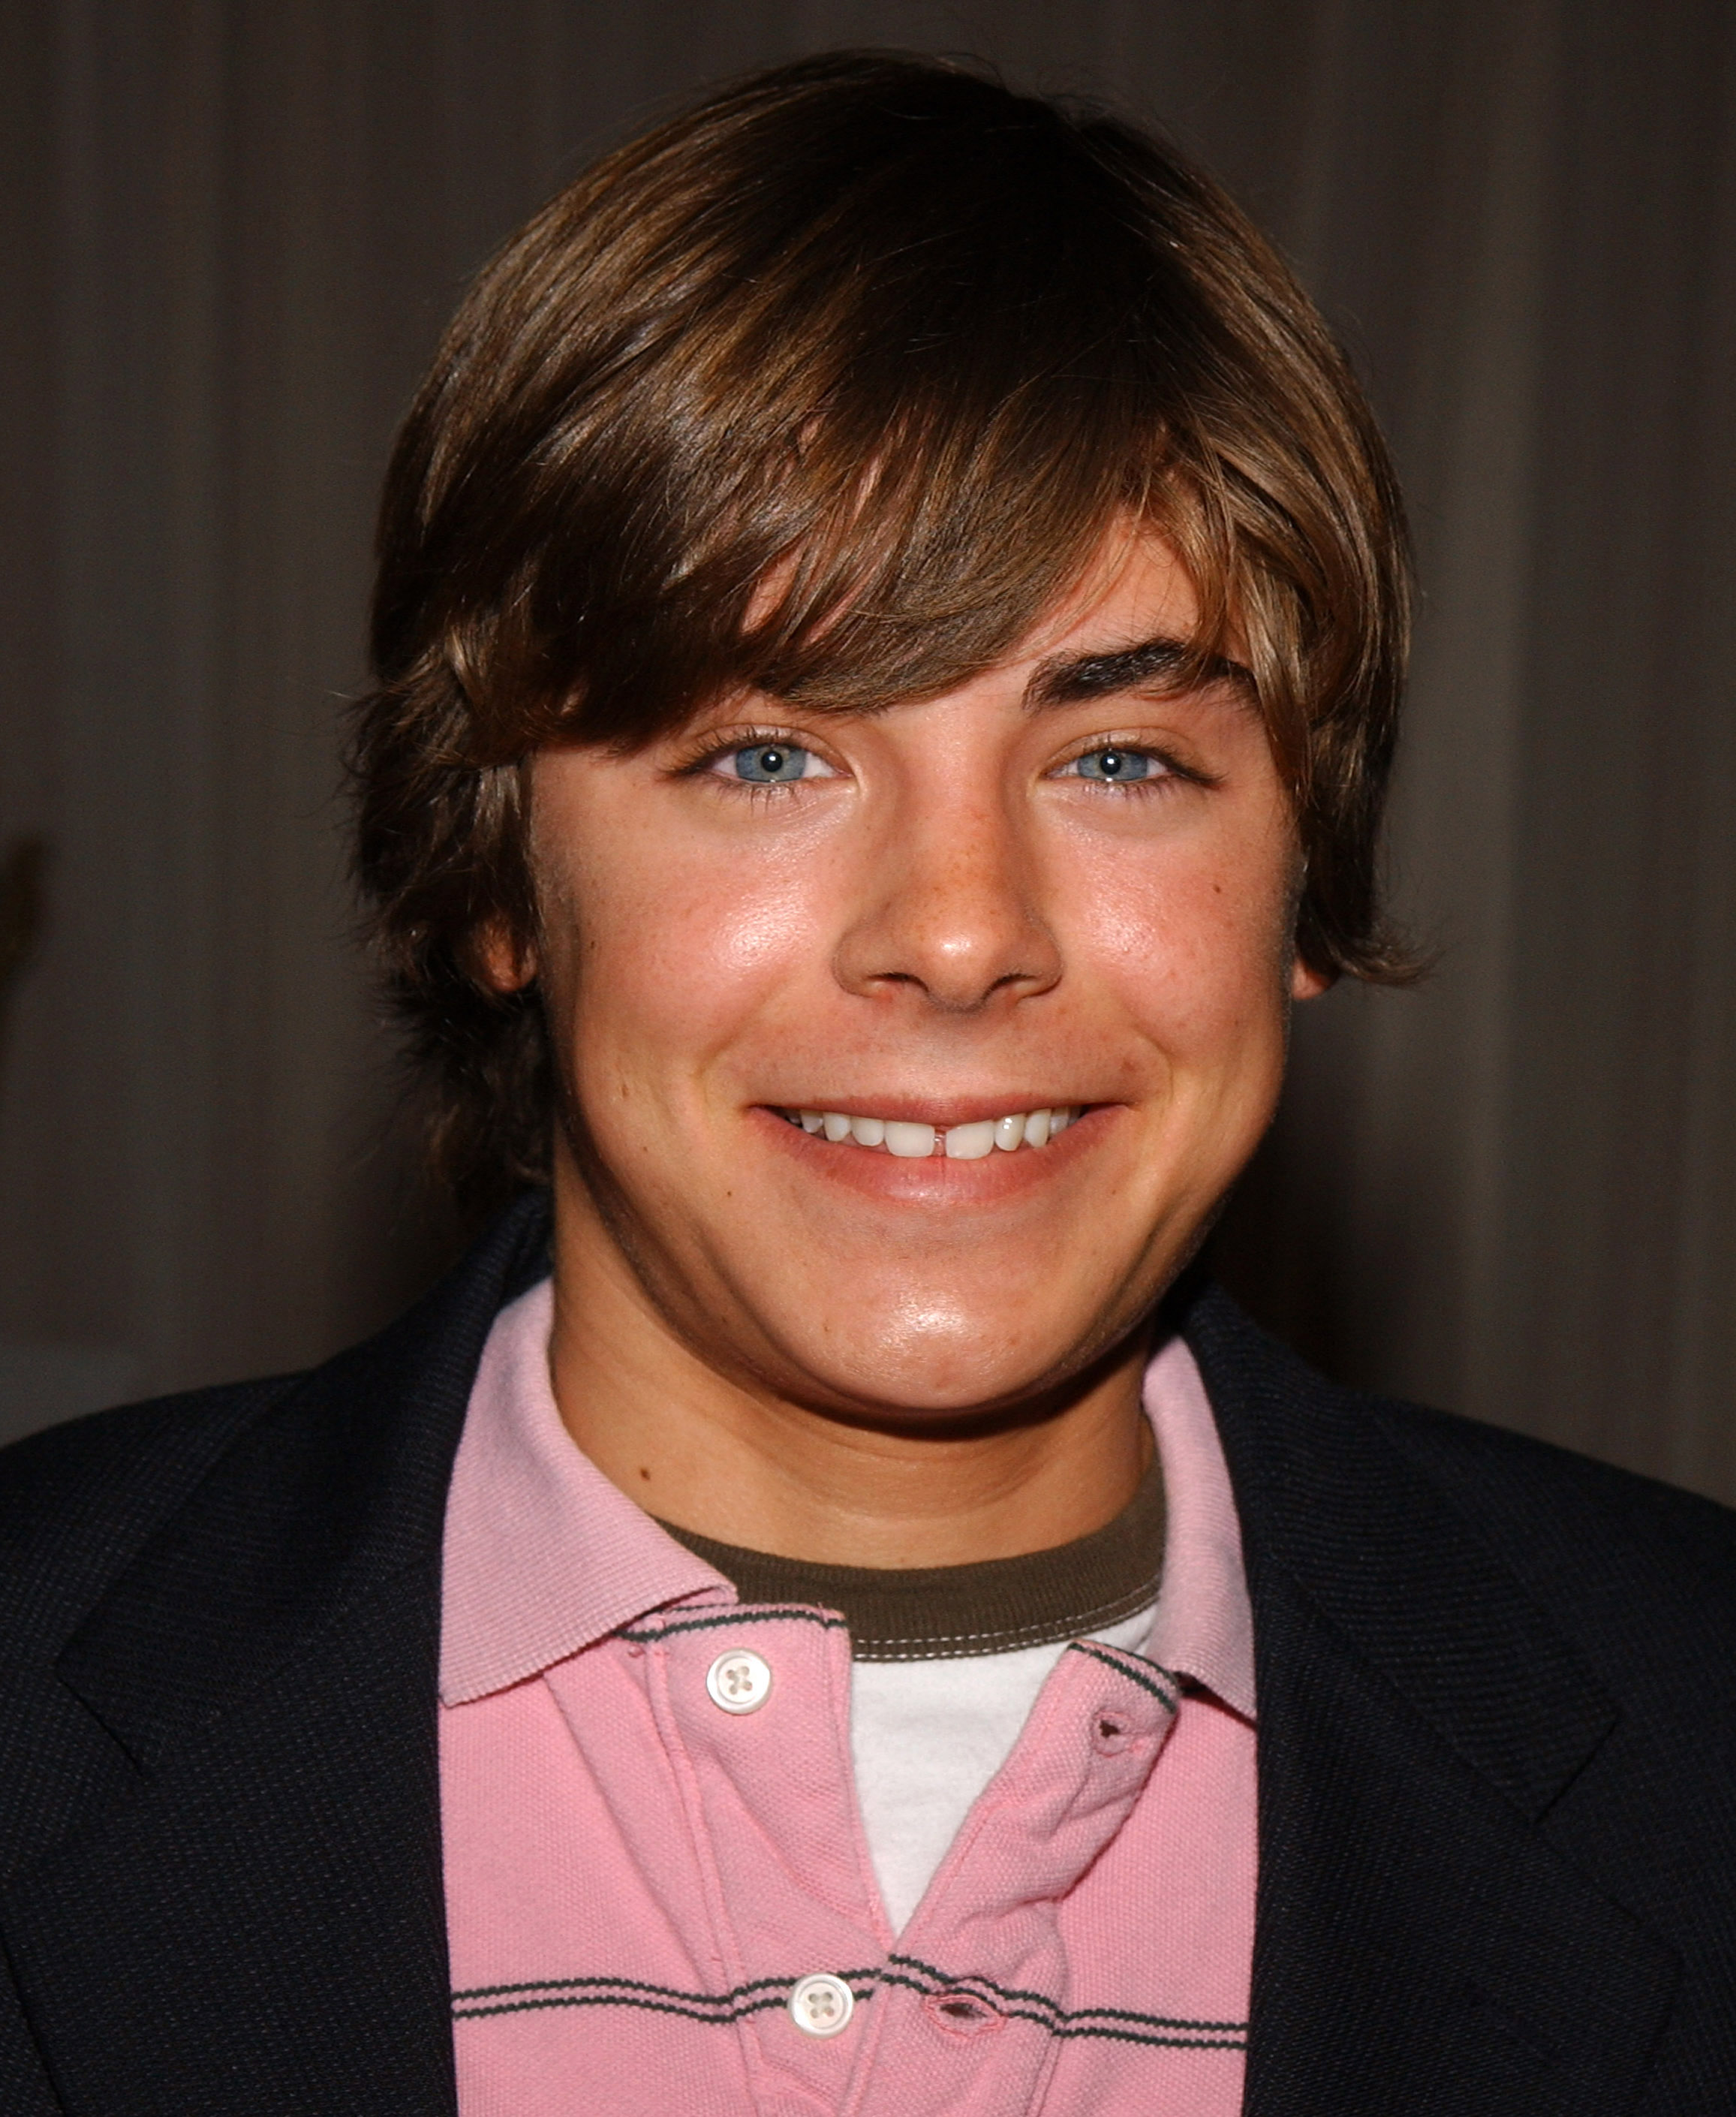 Zac Efron attends The 6th Annual Family Television Awards on December 1, 2004. | Source: Getty Images